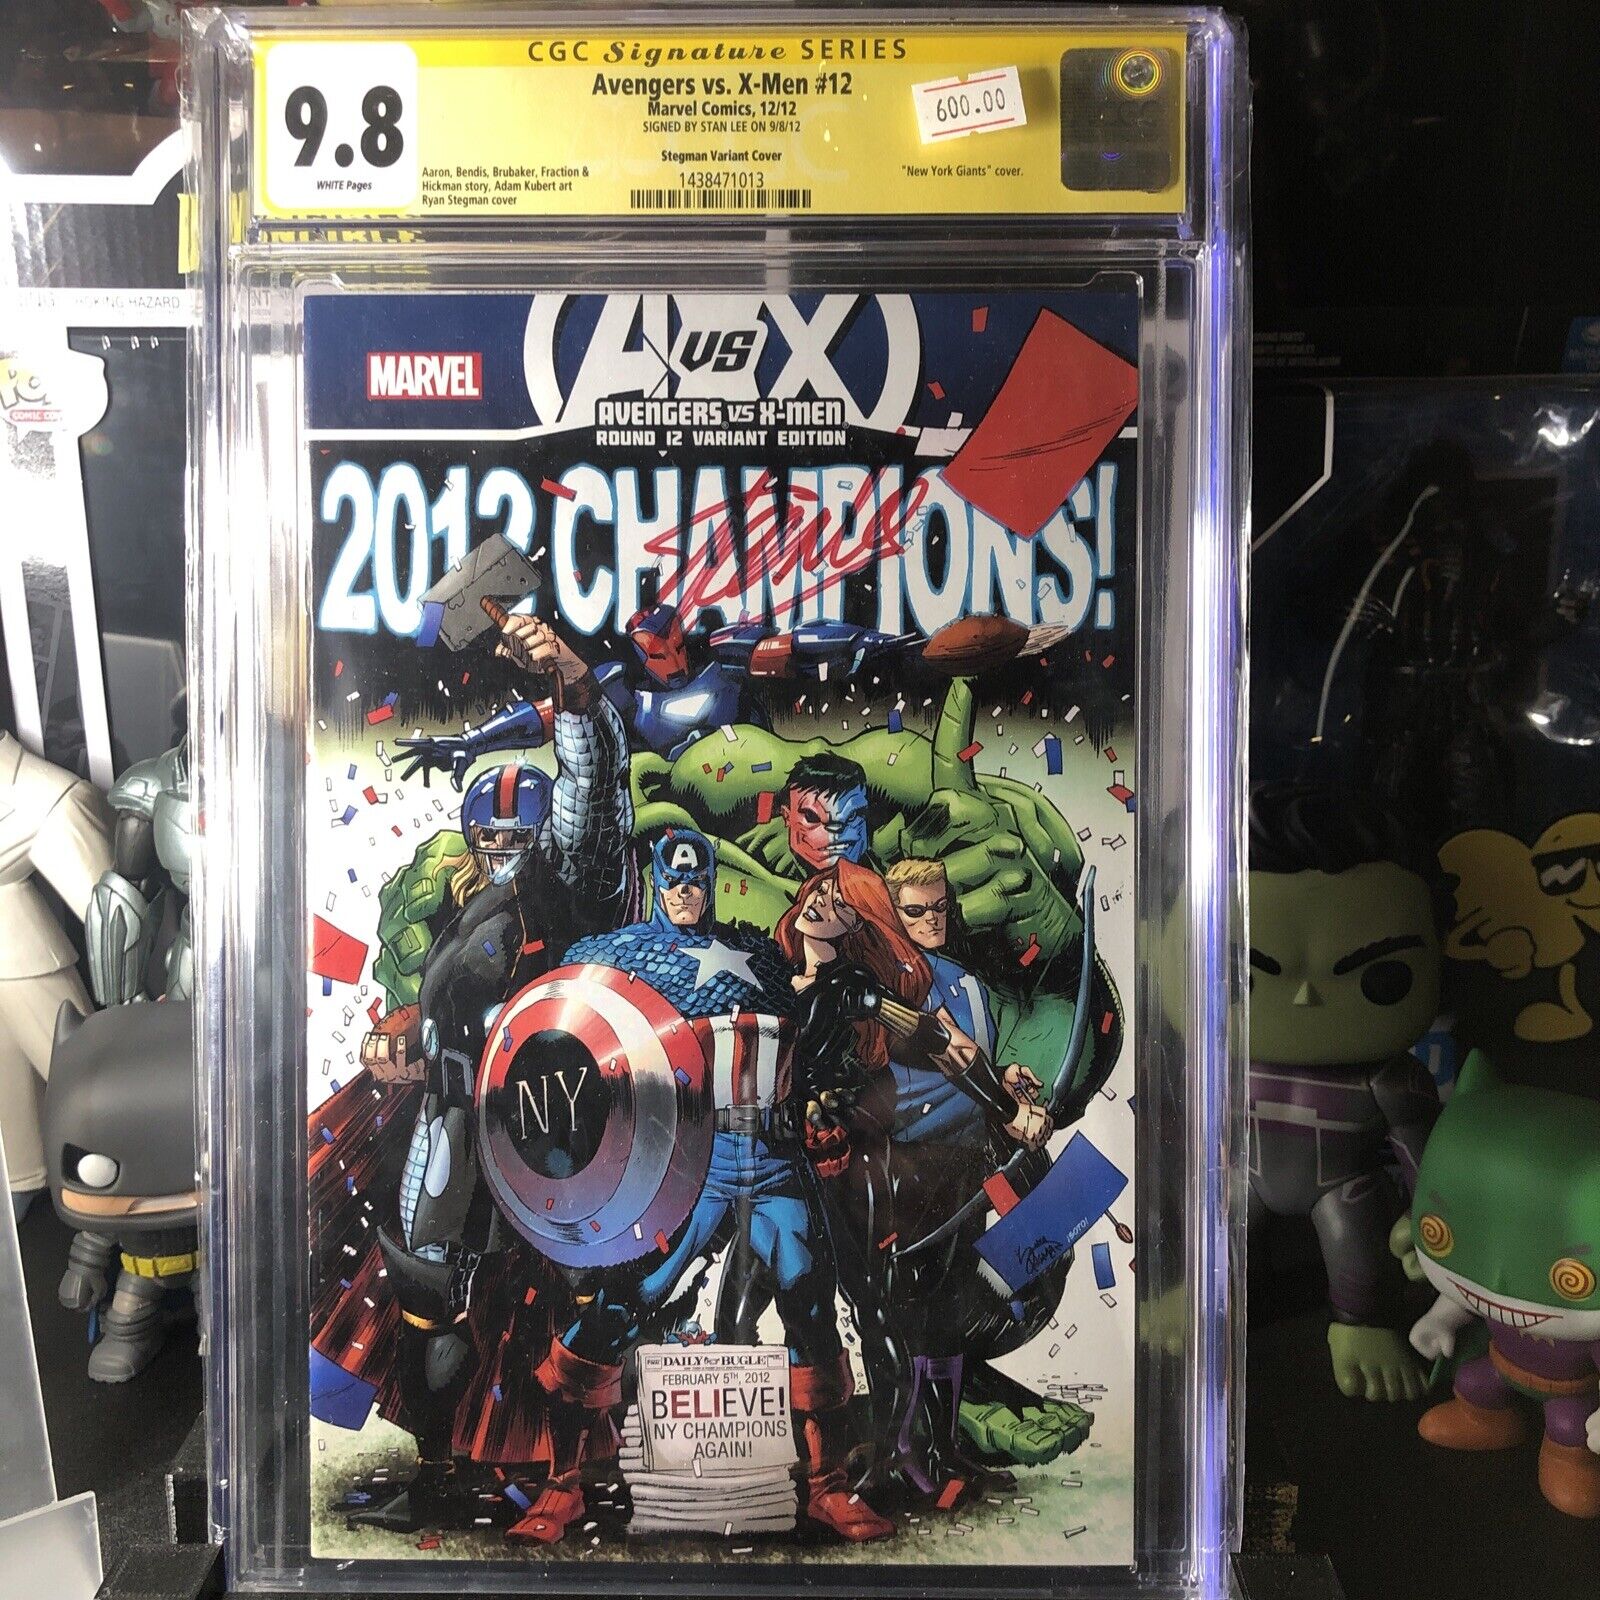 AVENGERS VS. X-MEN #12 - CGC 9.8 - NY GIANTS COVER - SIGNED BY STAN LEE